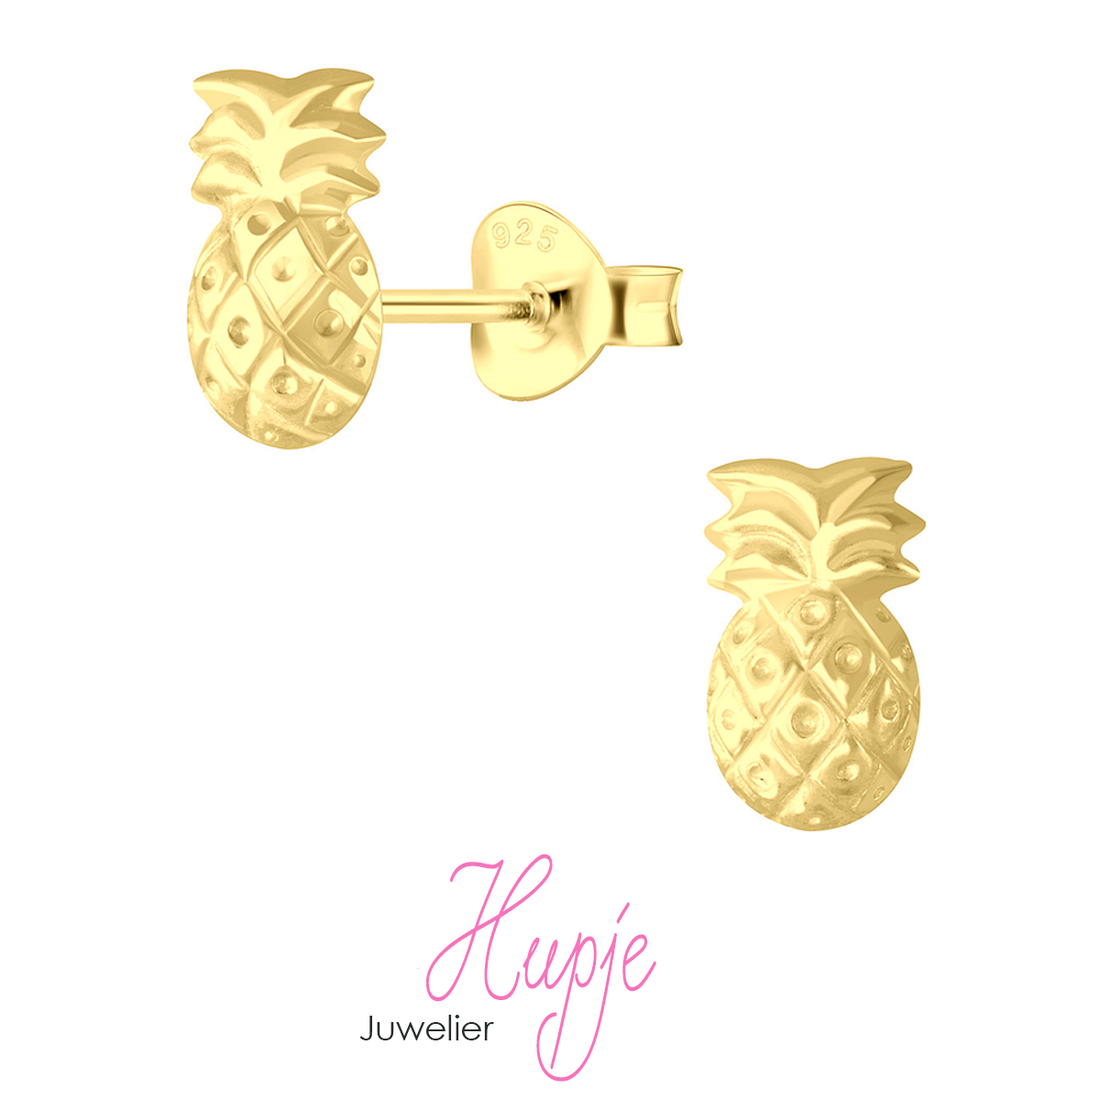 silver earrings with gold plating pineapple